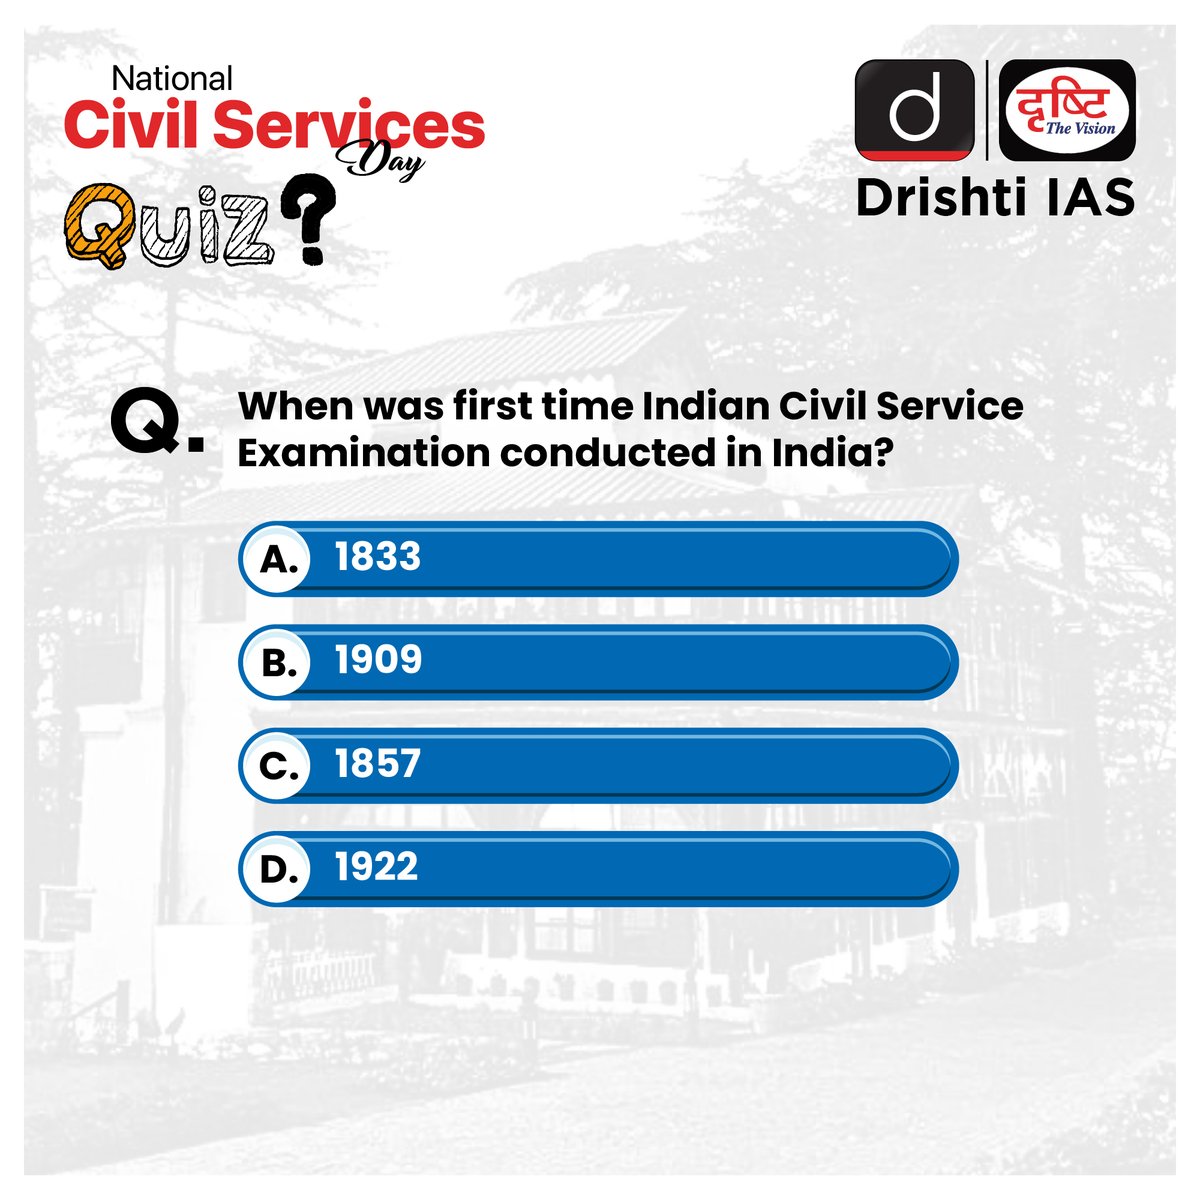 Explore the #CivilService 'Firsts' on National #CivilServicesDay. Share your answers in the comment section.

#FirstOfficer #National #UPSC #SardarVallabhBhaiPatel #SteelFrameOfIndia #LBSNAA #UPSC2024 #IAS #IFS #Officers #CivilServices #IPS #India #DrishtiIAS #DrishtiIASEnglish